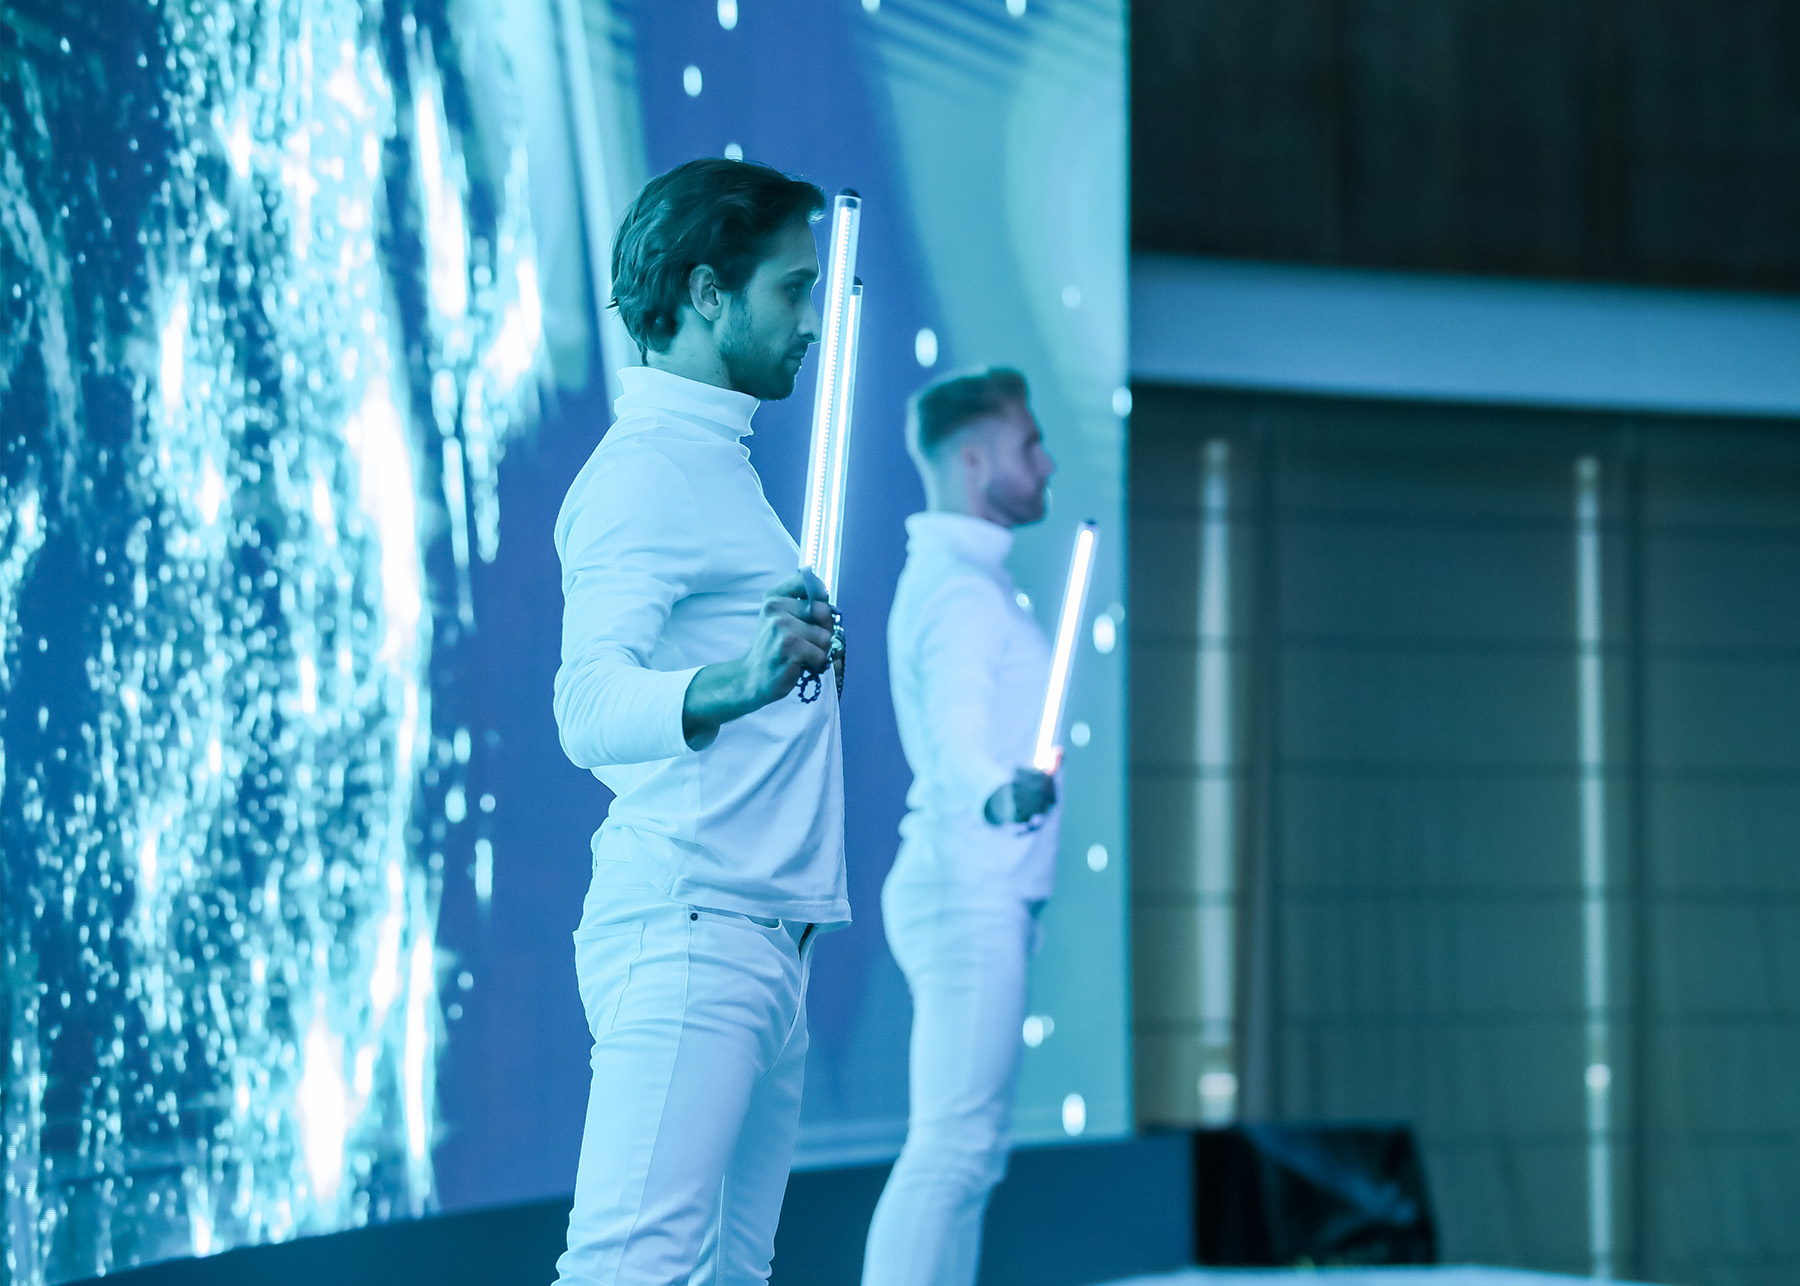 HP immersive event performance